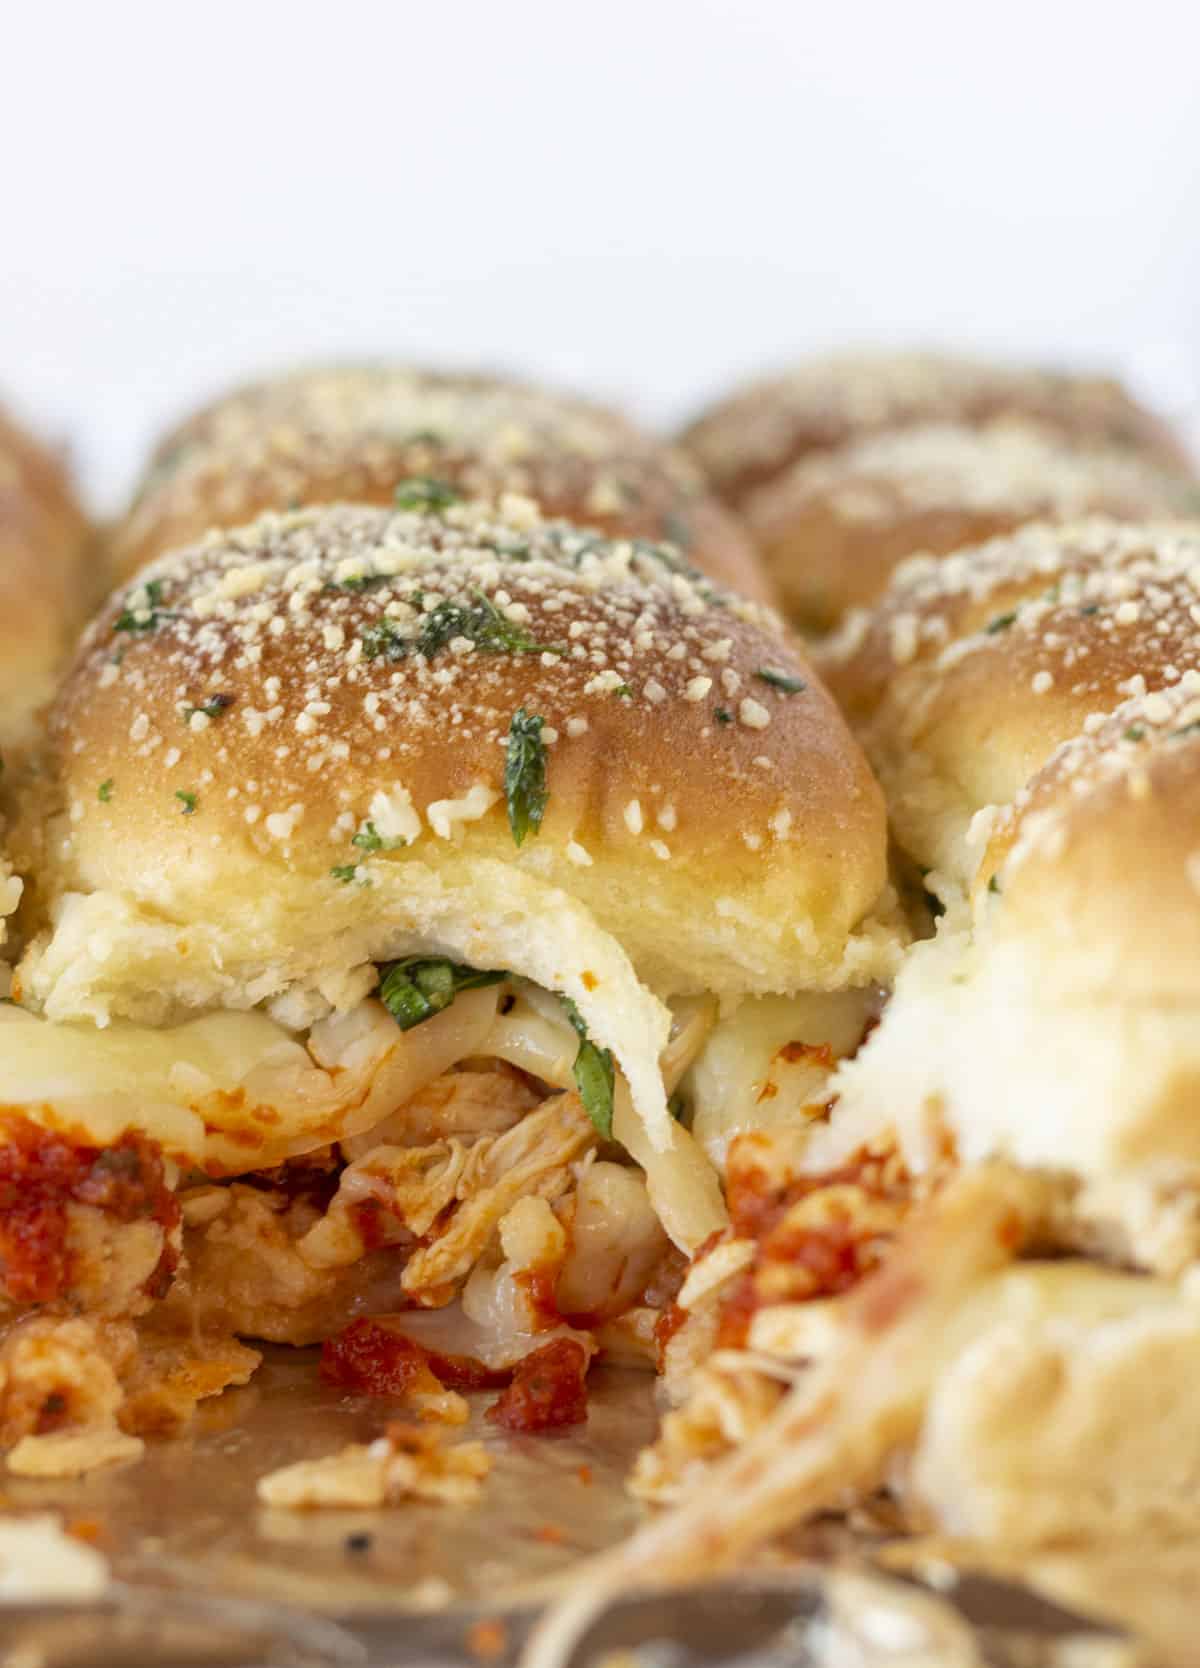 Looking at the inside of baked Chicken Parmesan Sliders.